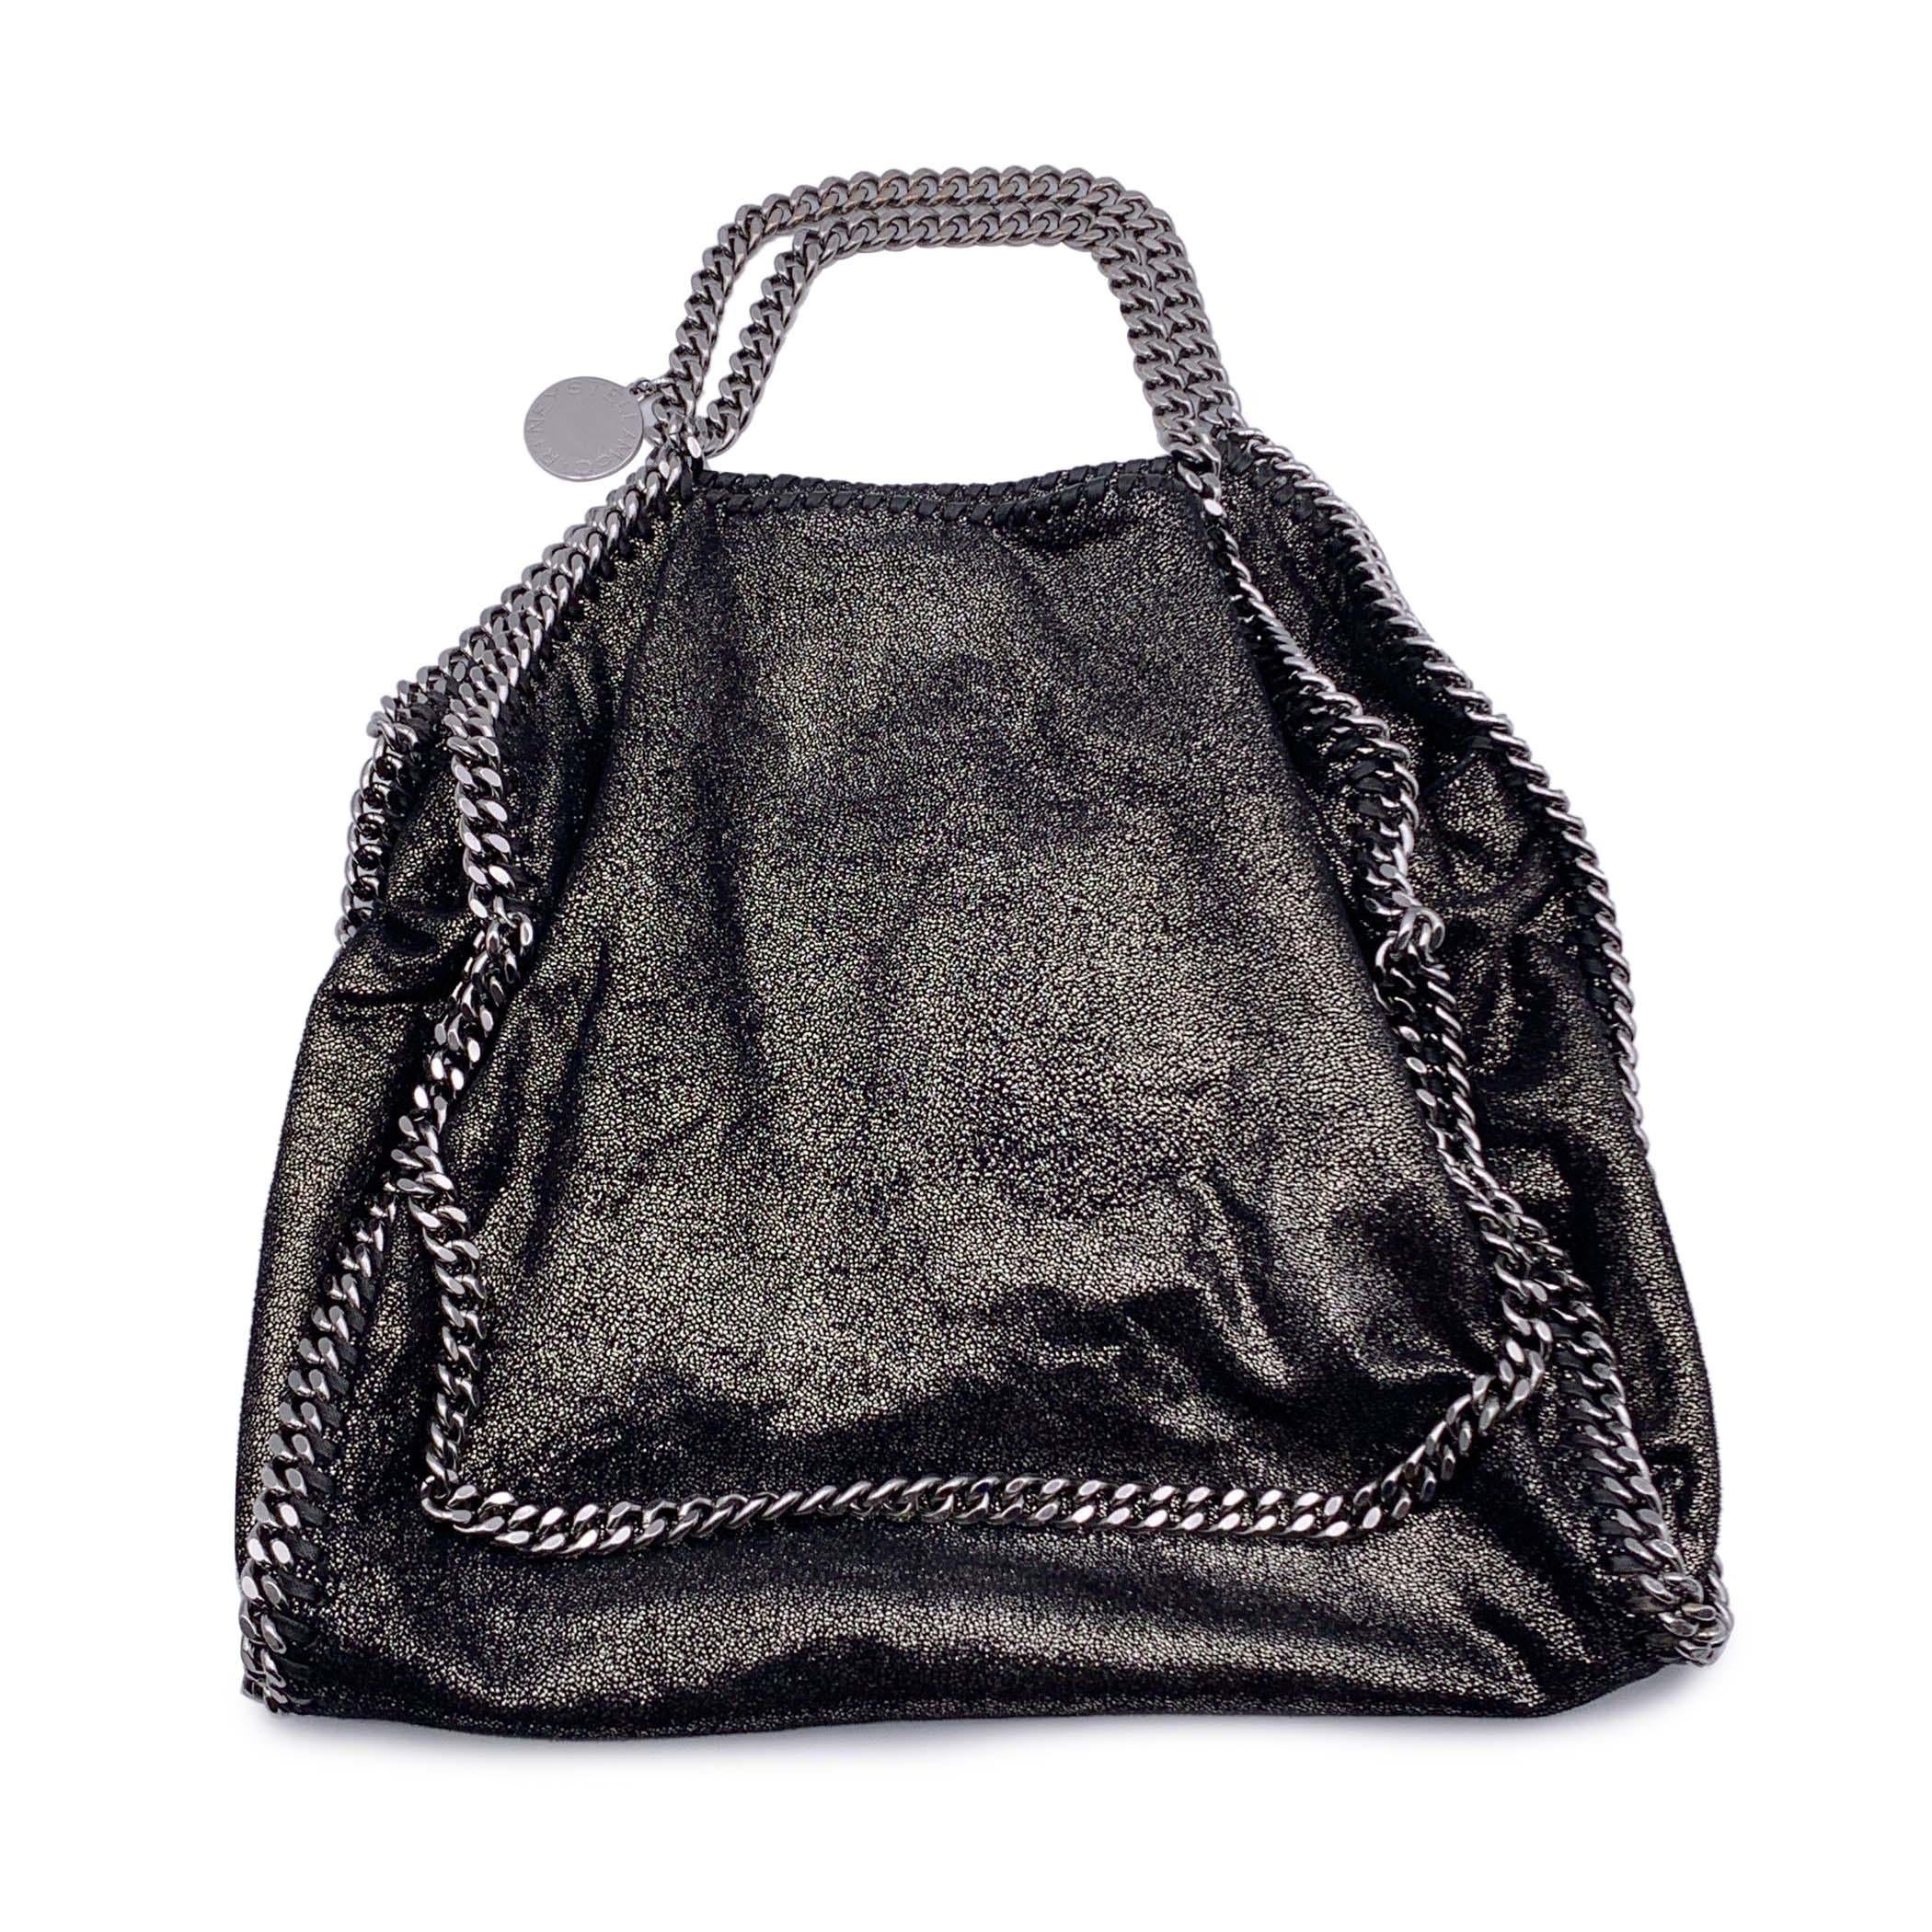 Stella McCartney Black Metallic Suede Like Falabella Tote Shoulder Bag In Excellent Condition For Sale In Rome, Rome